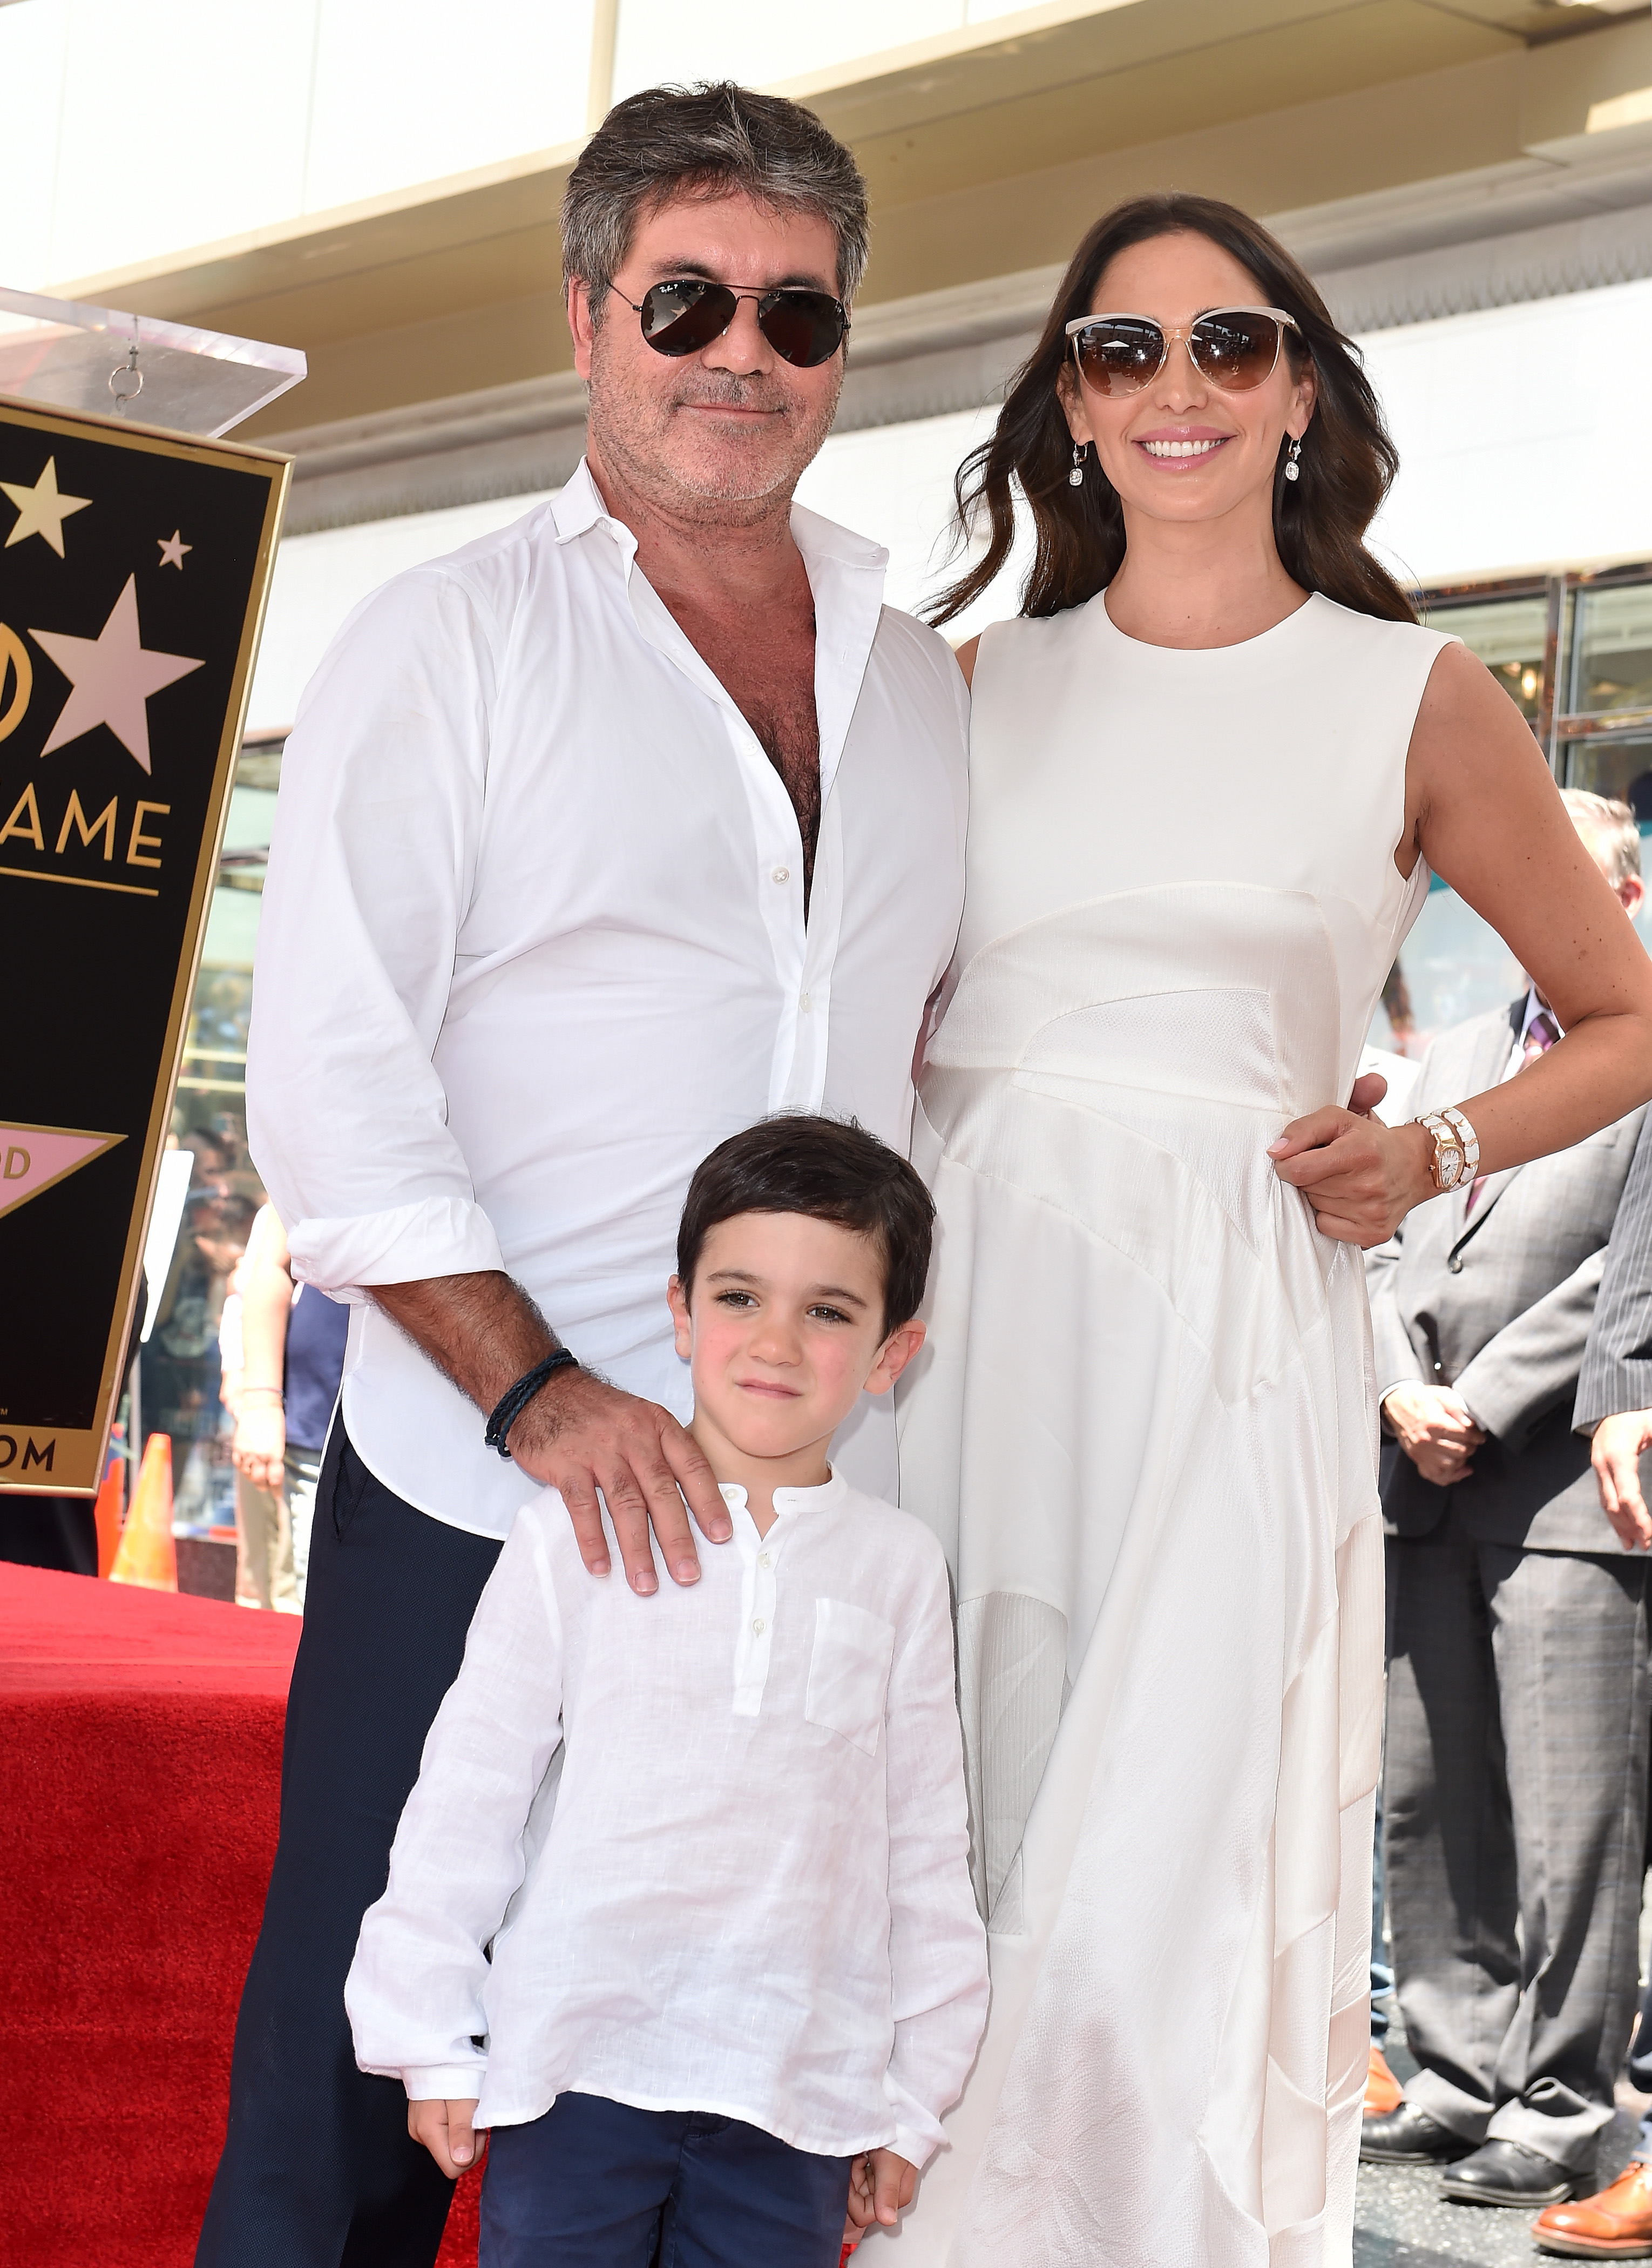 Simon Cowell, Lauren Silverman and Eric Cowell attend the ceremony honoring Simon Cowell with star on the Hollywood Walk of Fame, on August 22, 2018, in Hollywood, California. | Source: Getty Images